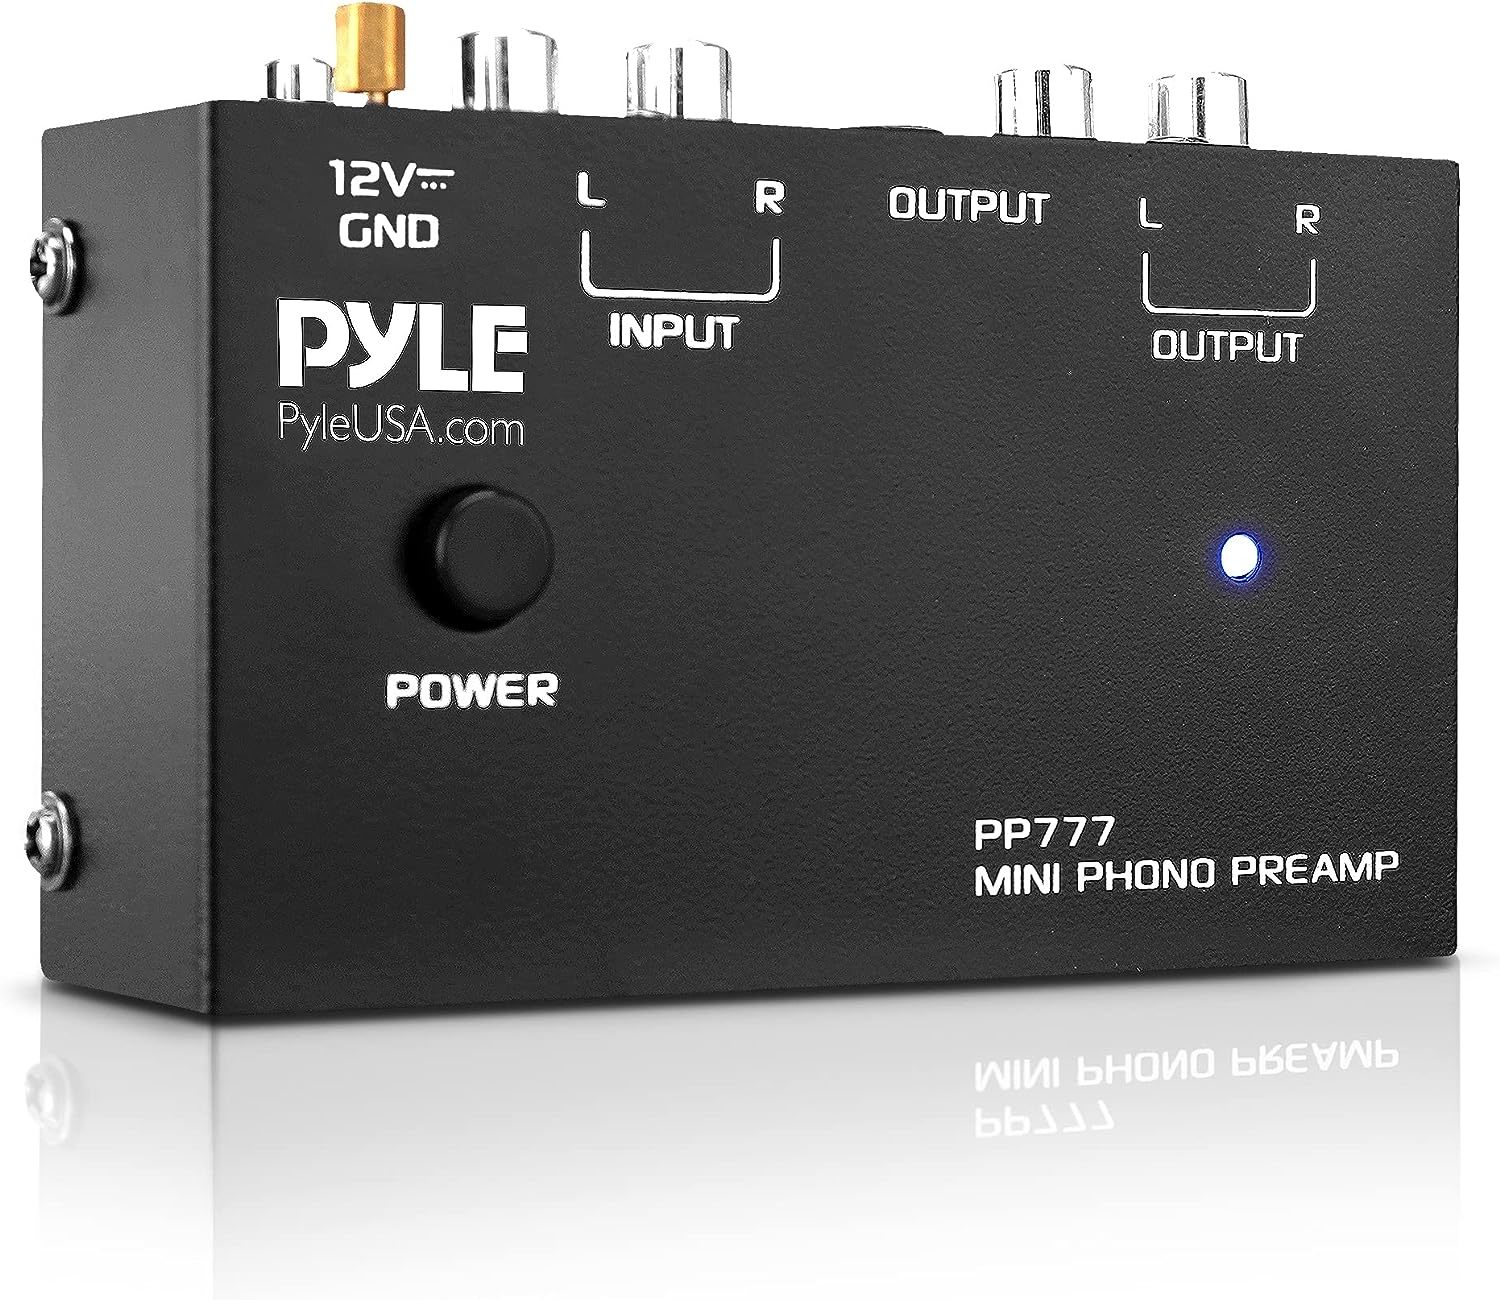 Phono Turntable Preamp Pyle Output Pp777 Mini Electronic Audio Stereo Phonograph - $35.96